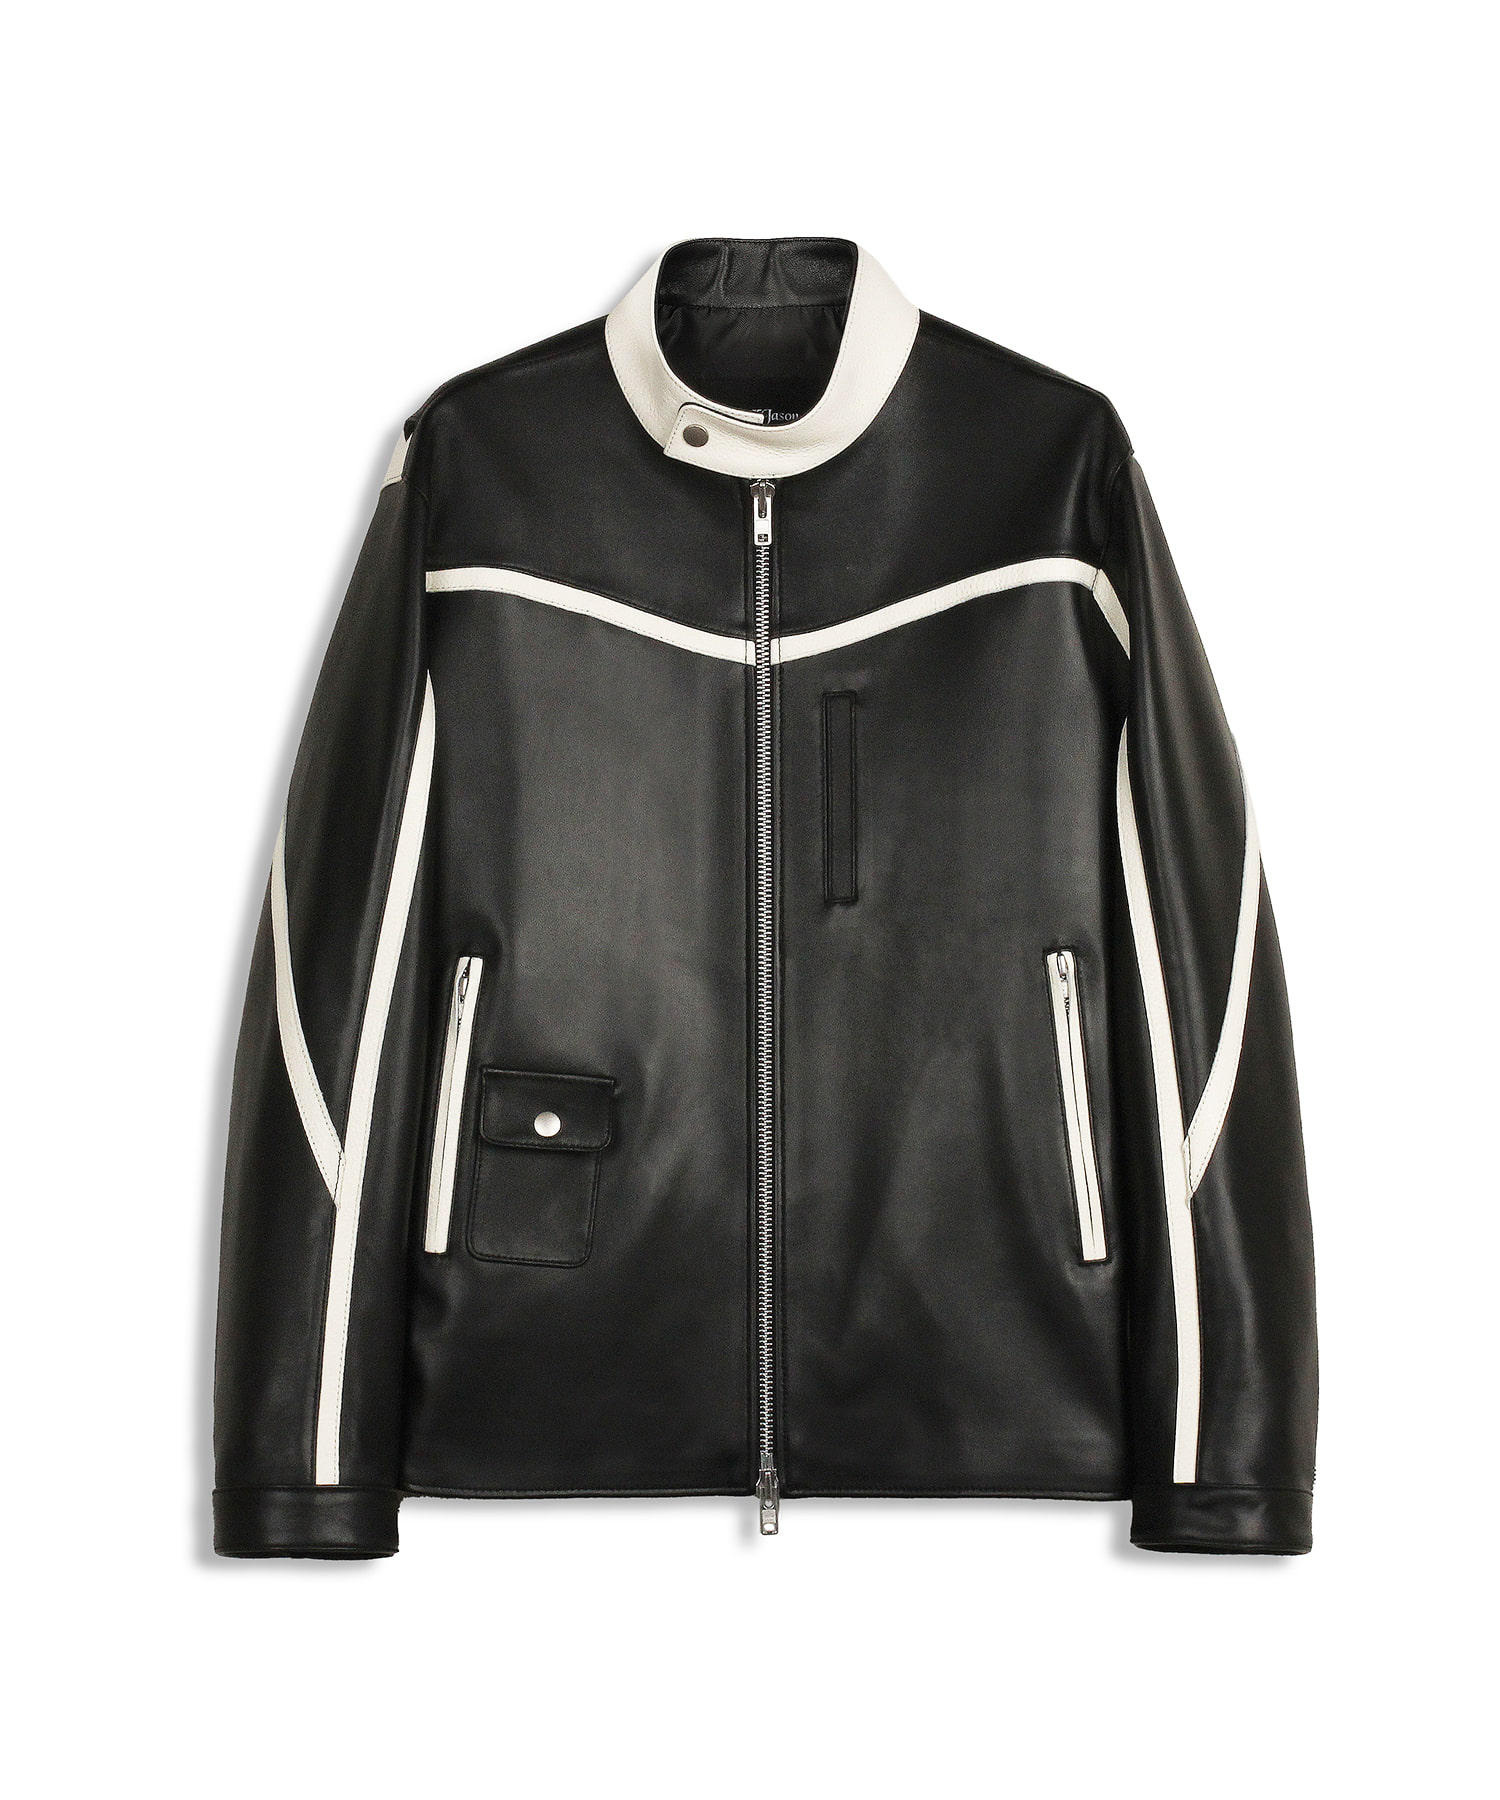 Overfit mixed leather racing jacket